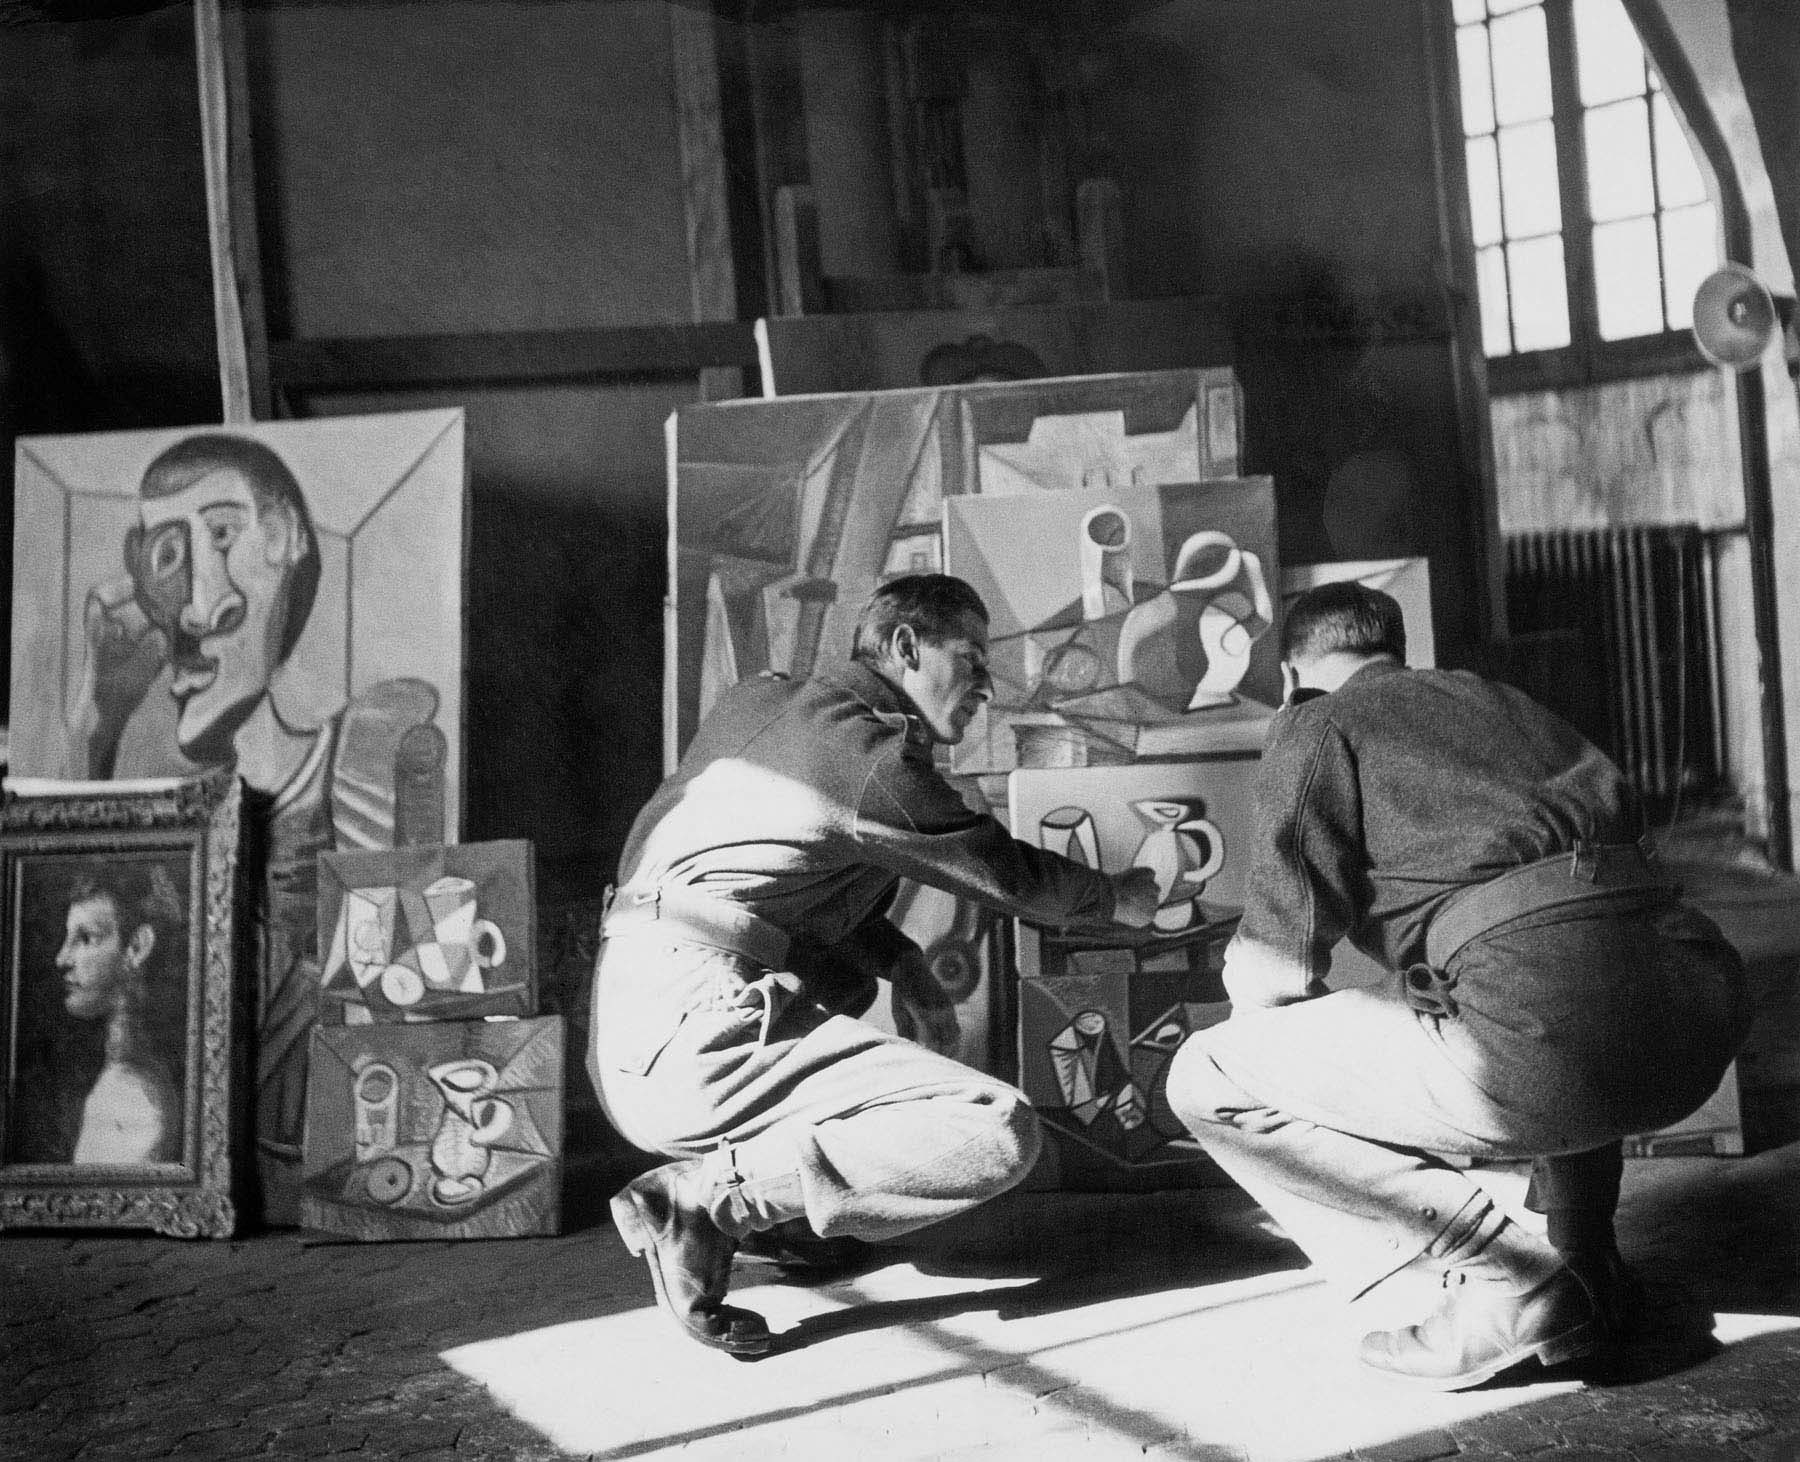 A black-and-white photograph of two men in military uniforms crouching in front of paintings in an artist's studio.